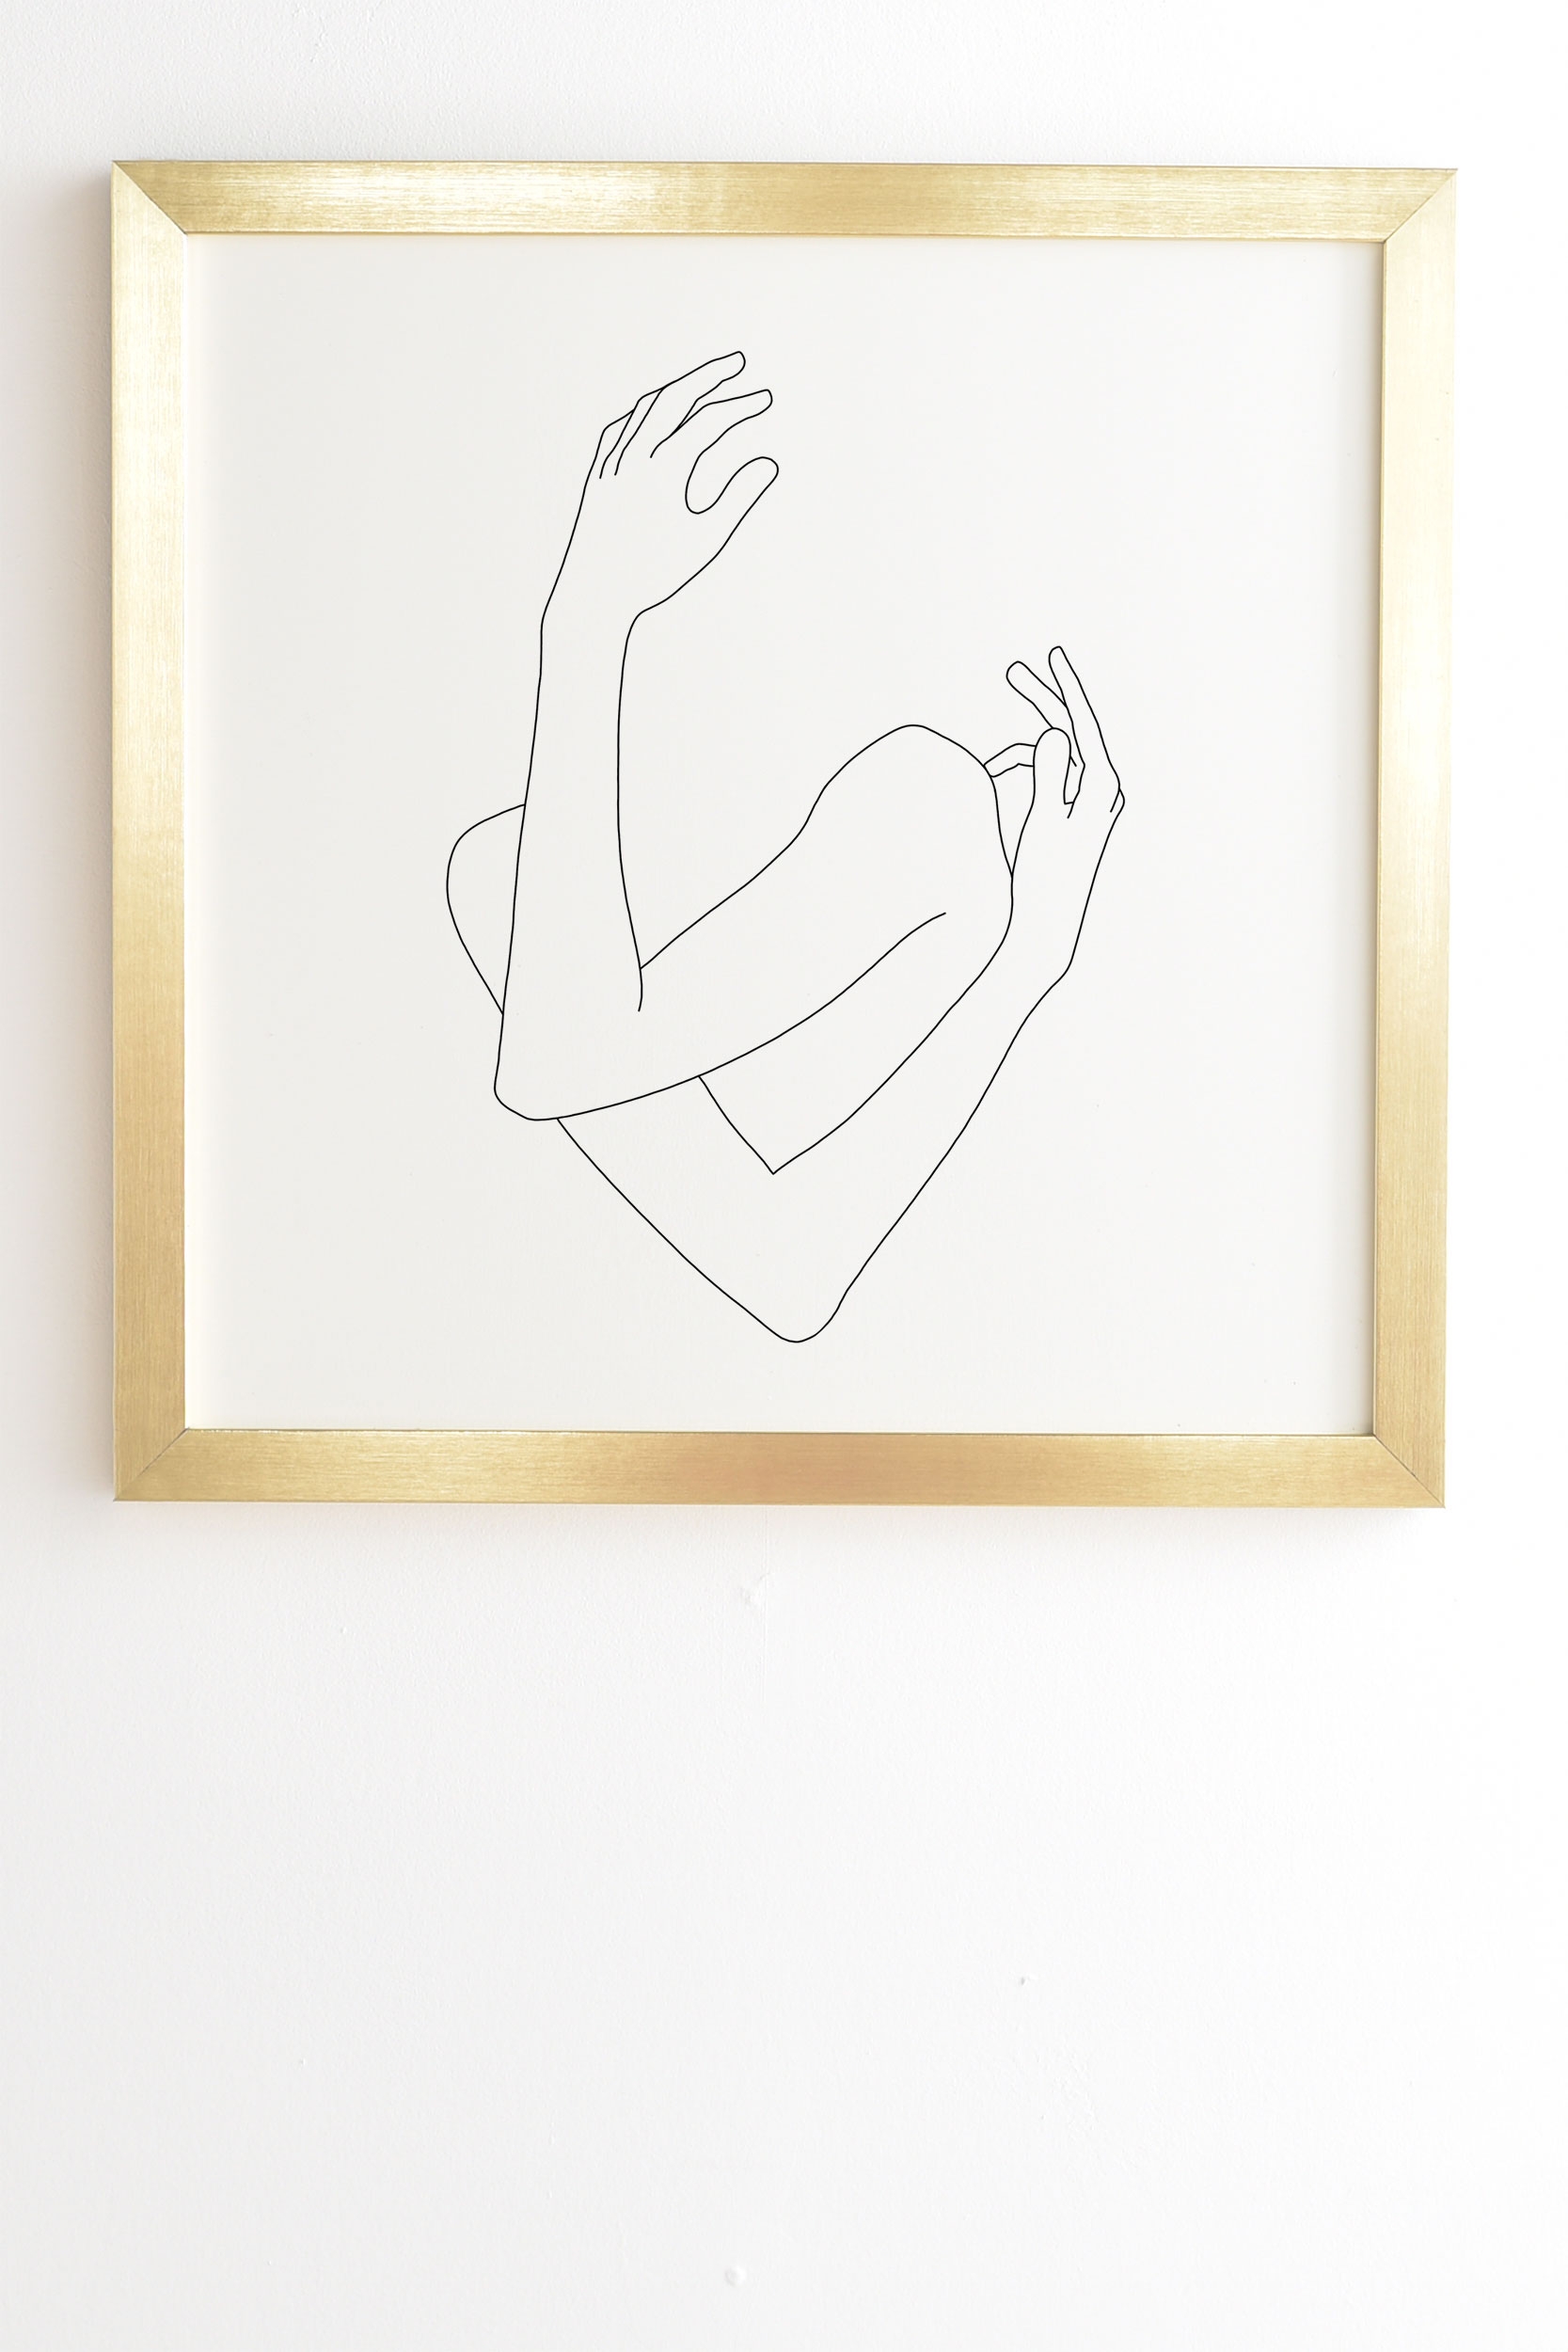 Crossed Arms Illustration Jill by The Colour Study - Framed Wall Art Basic Gold 20" x 20" - Image 1